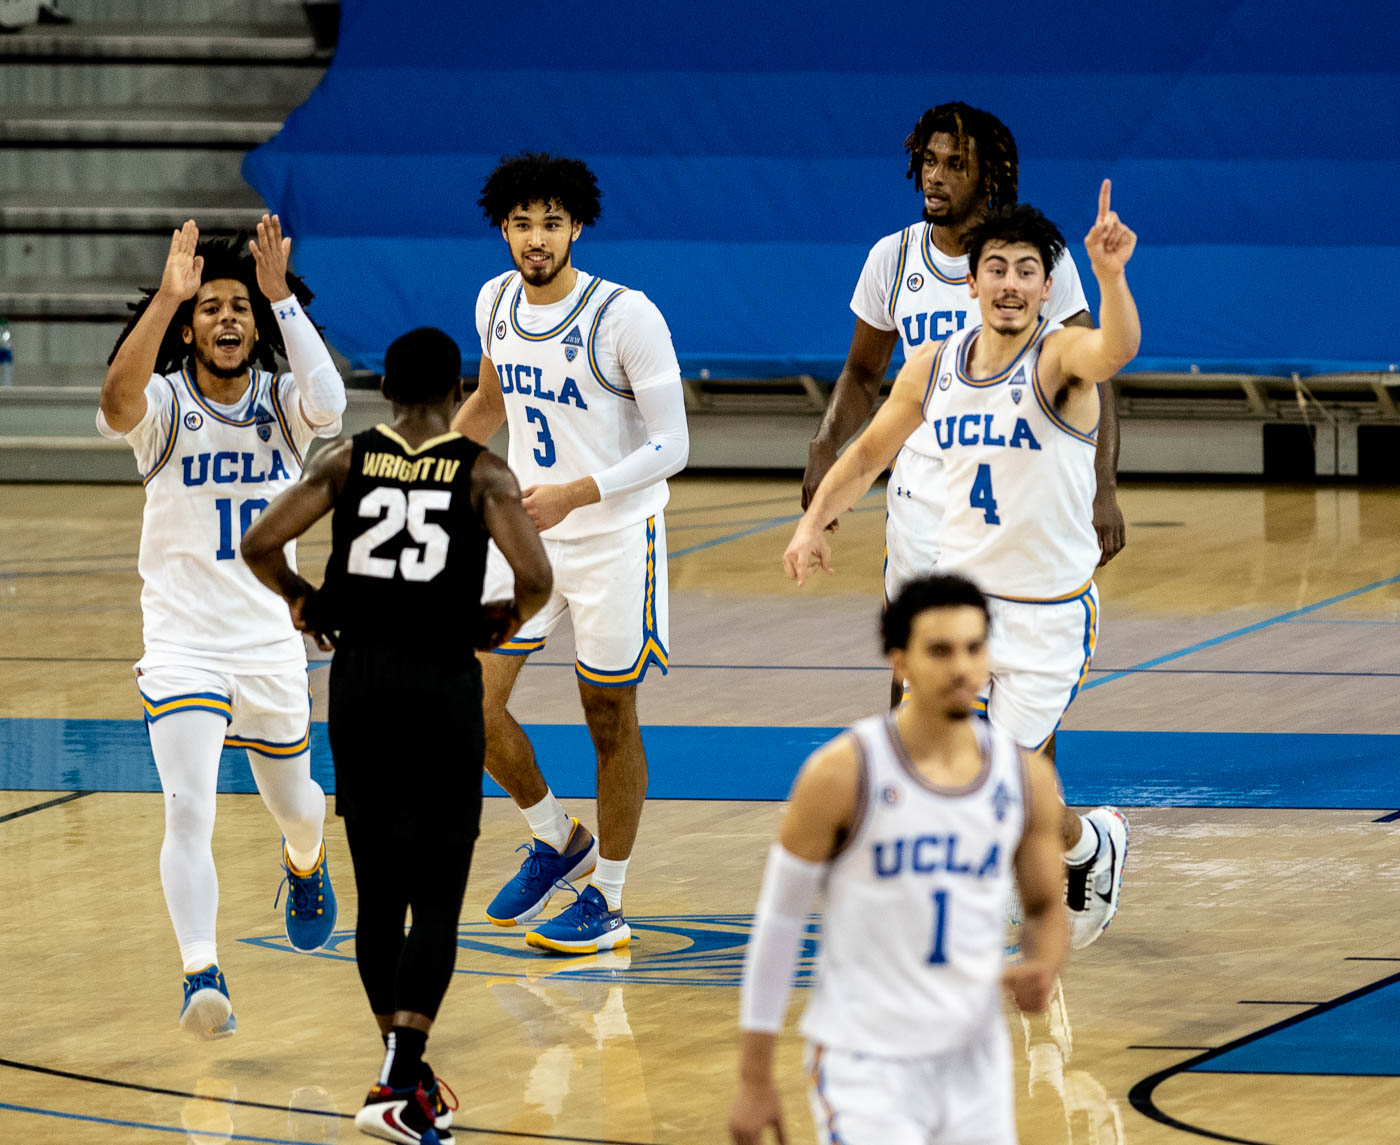 Gallery UCLA men’s basketball starts 2021 with a 6562 win over